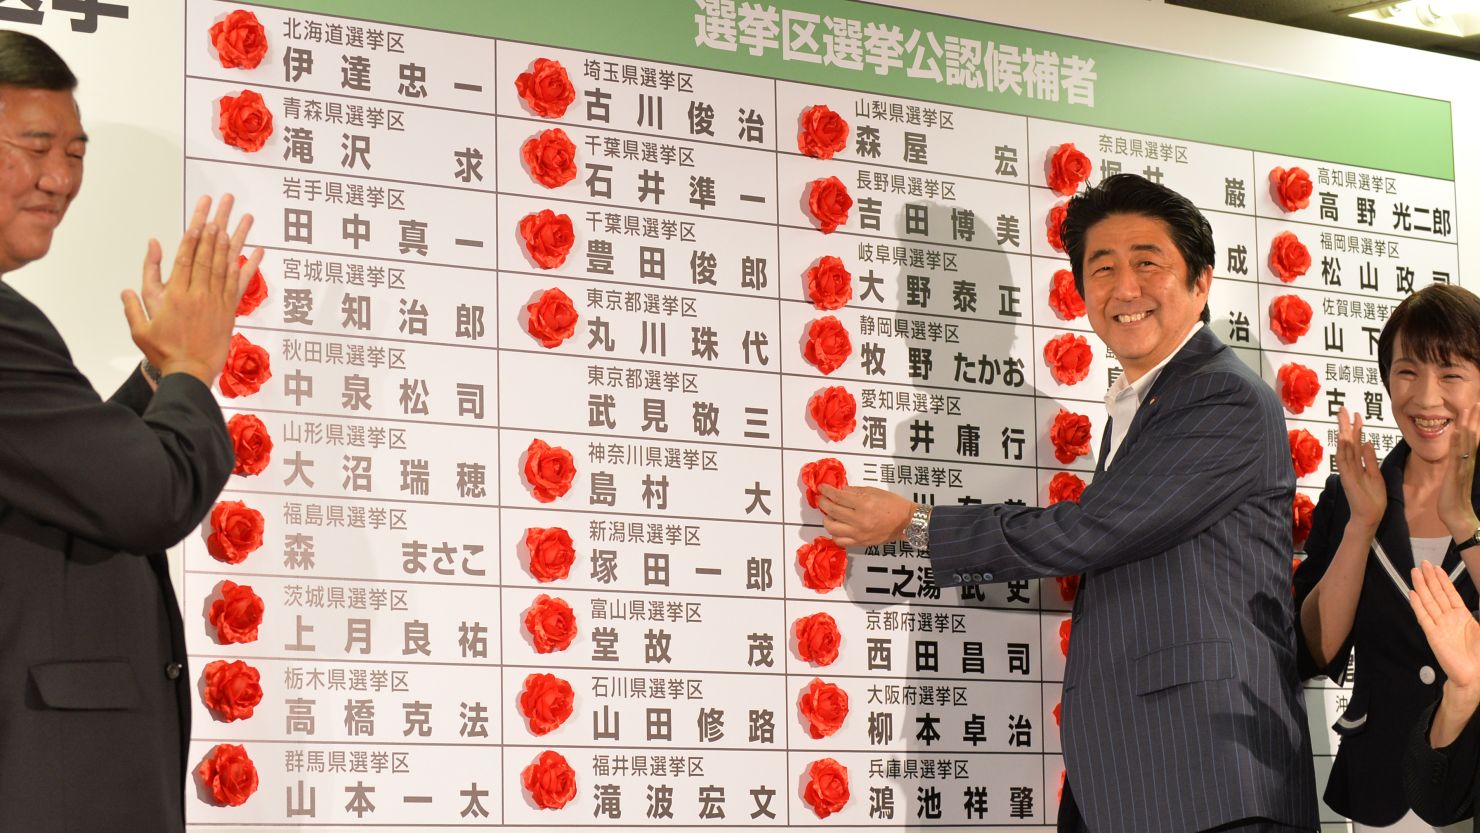 Prime Minister Shinzo Abe places a red paper rose on a LDP candidate's name to indicate an election victory on Sunday.